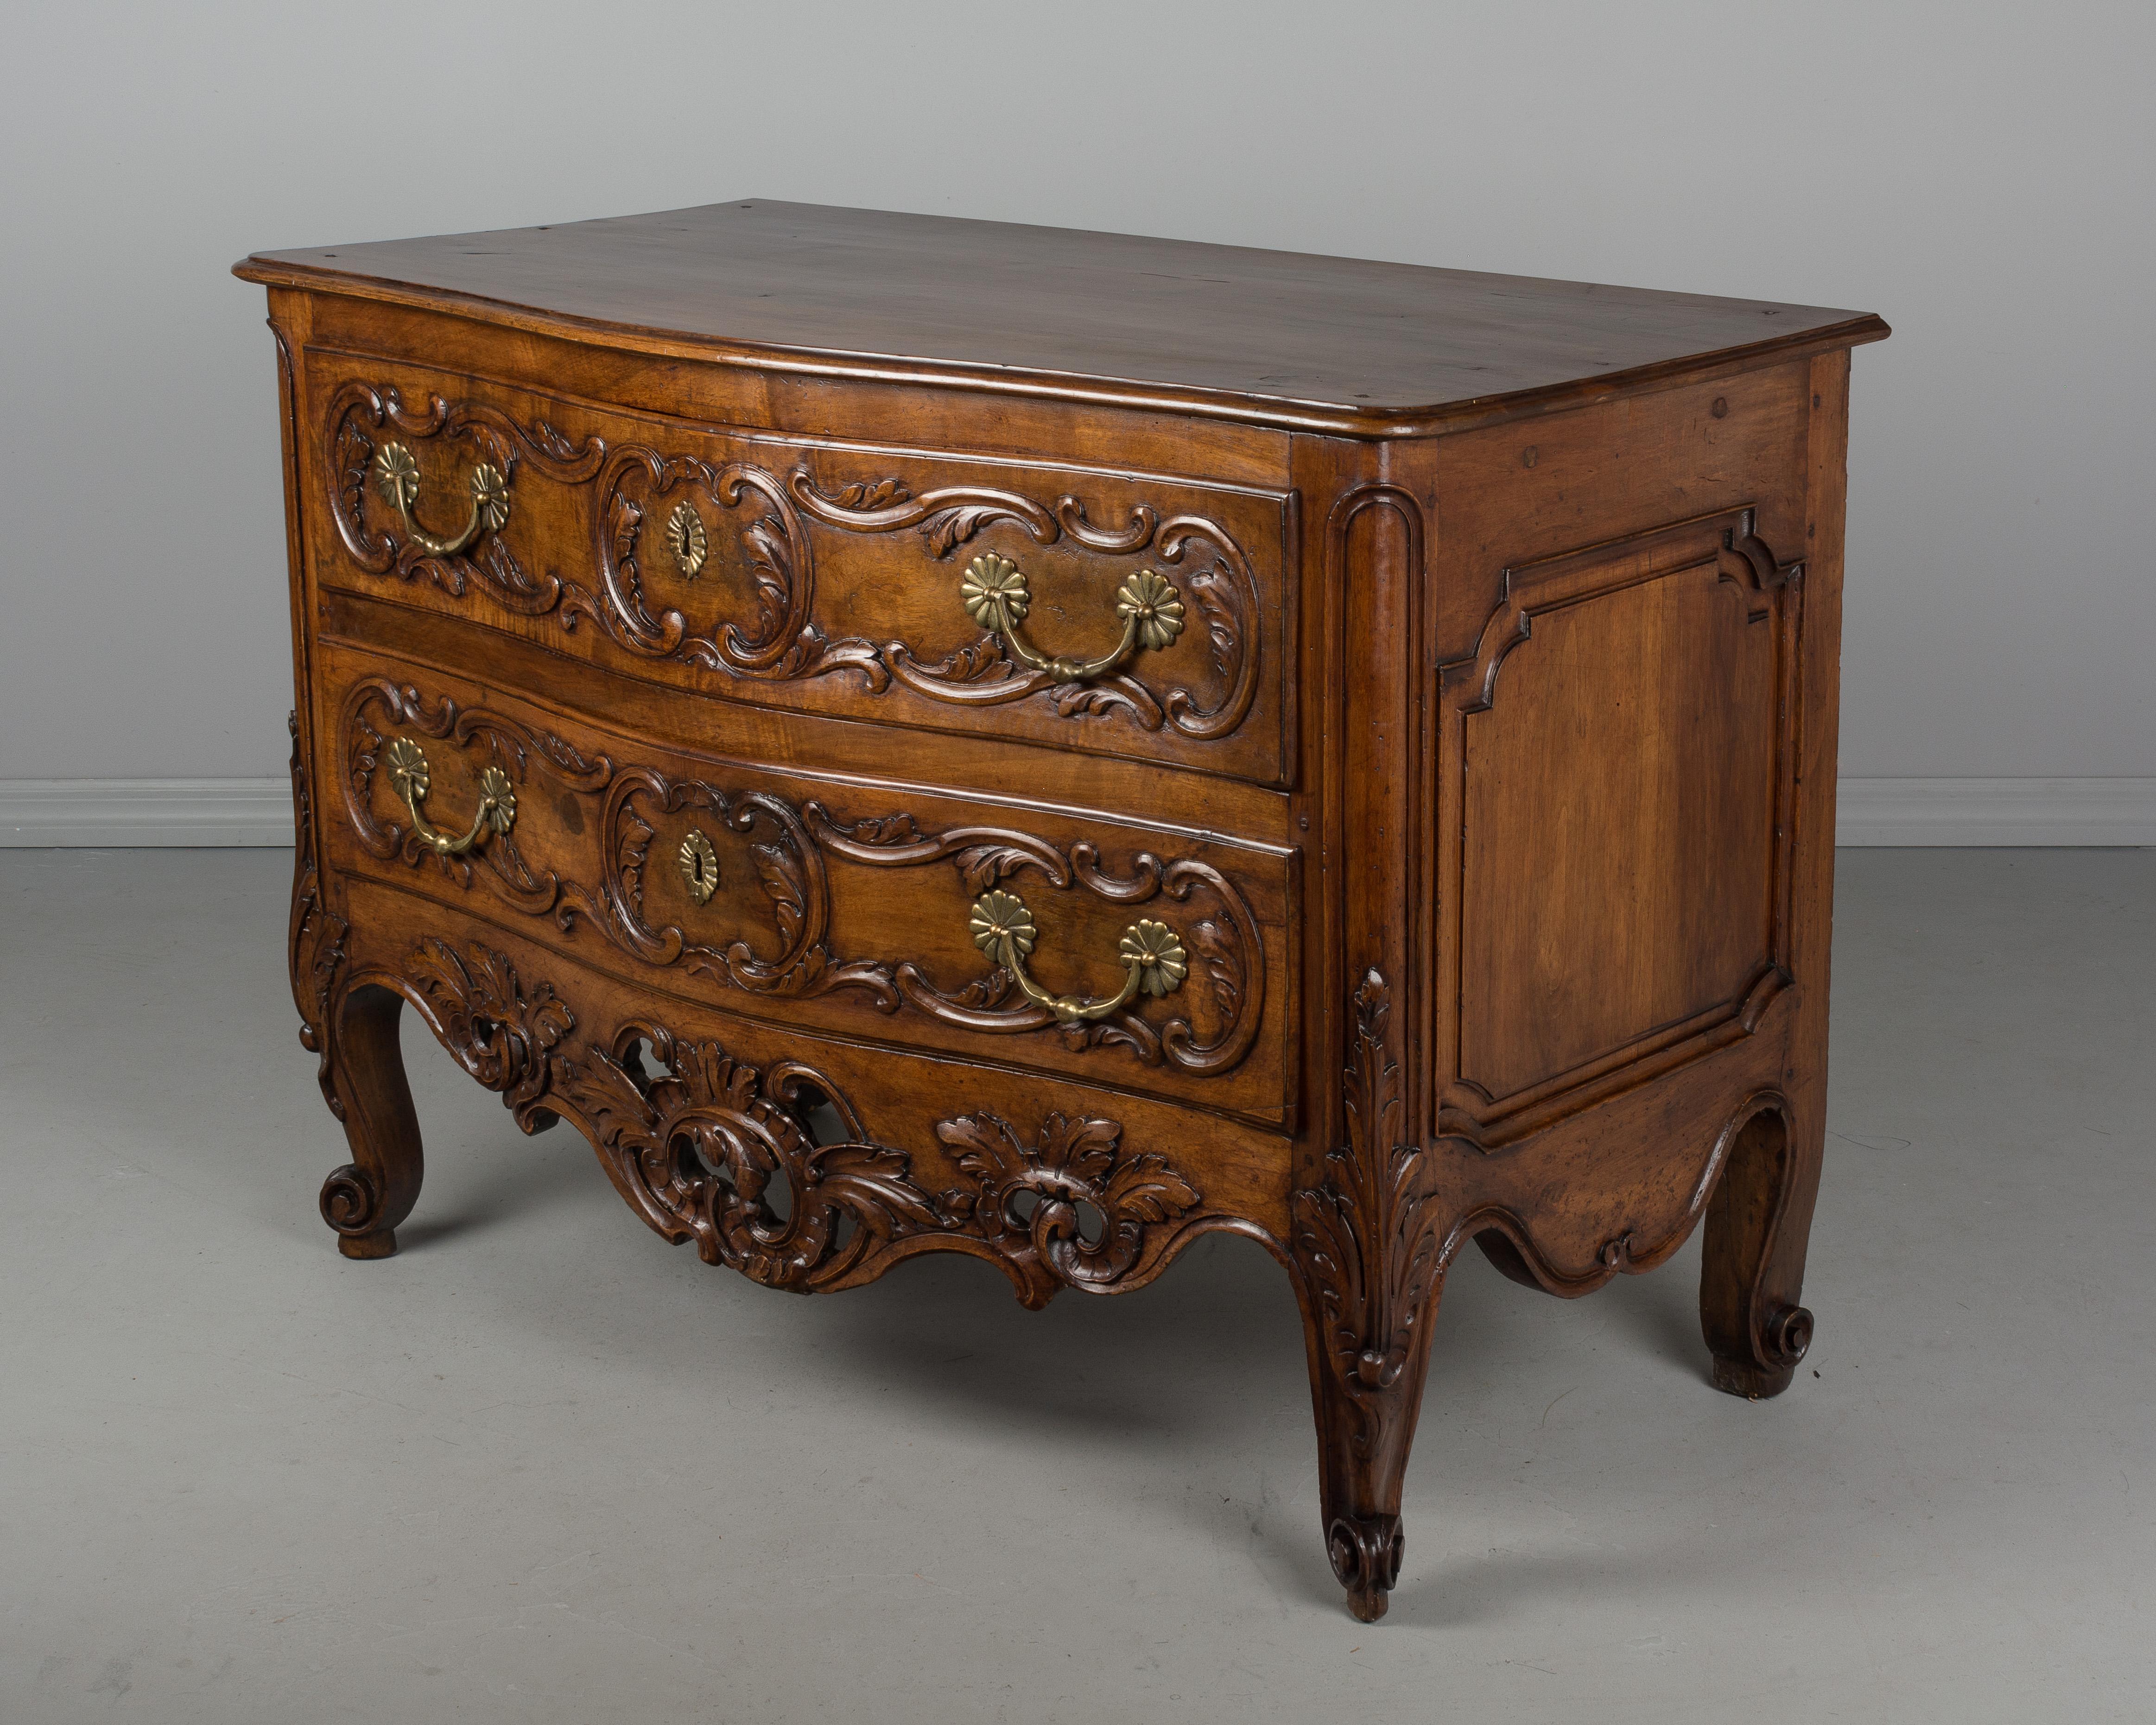 A fine 18th century Louis XV period commode from the town of Nîmes in Provence. Made of solid walnut with serpentine front and raised panels on the sides. Pegged construction with waxed finish. Beautiful hand-carved foliate decoration including an